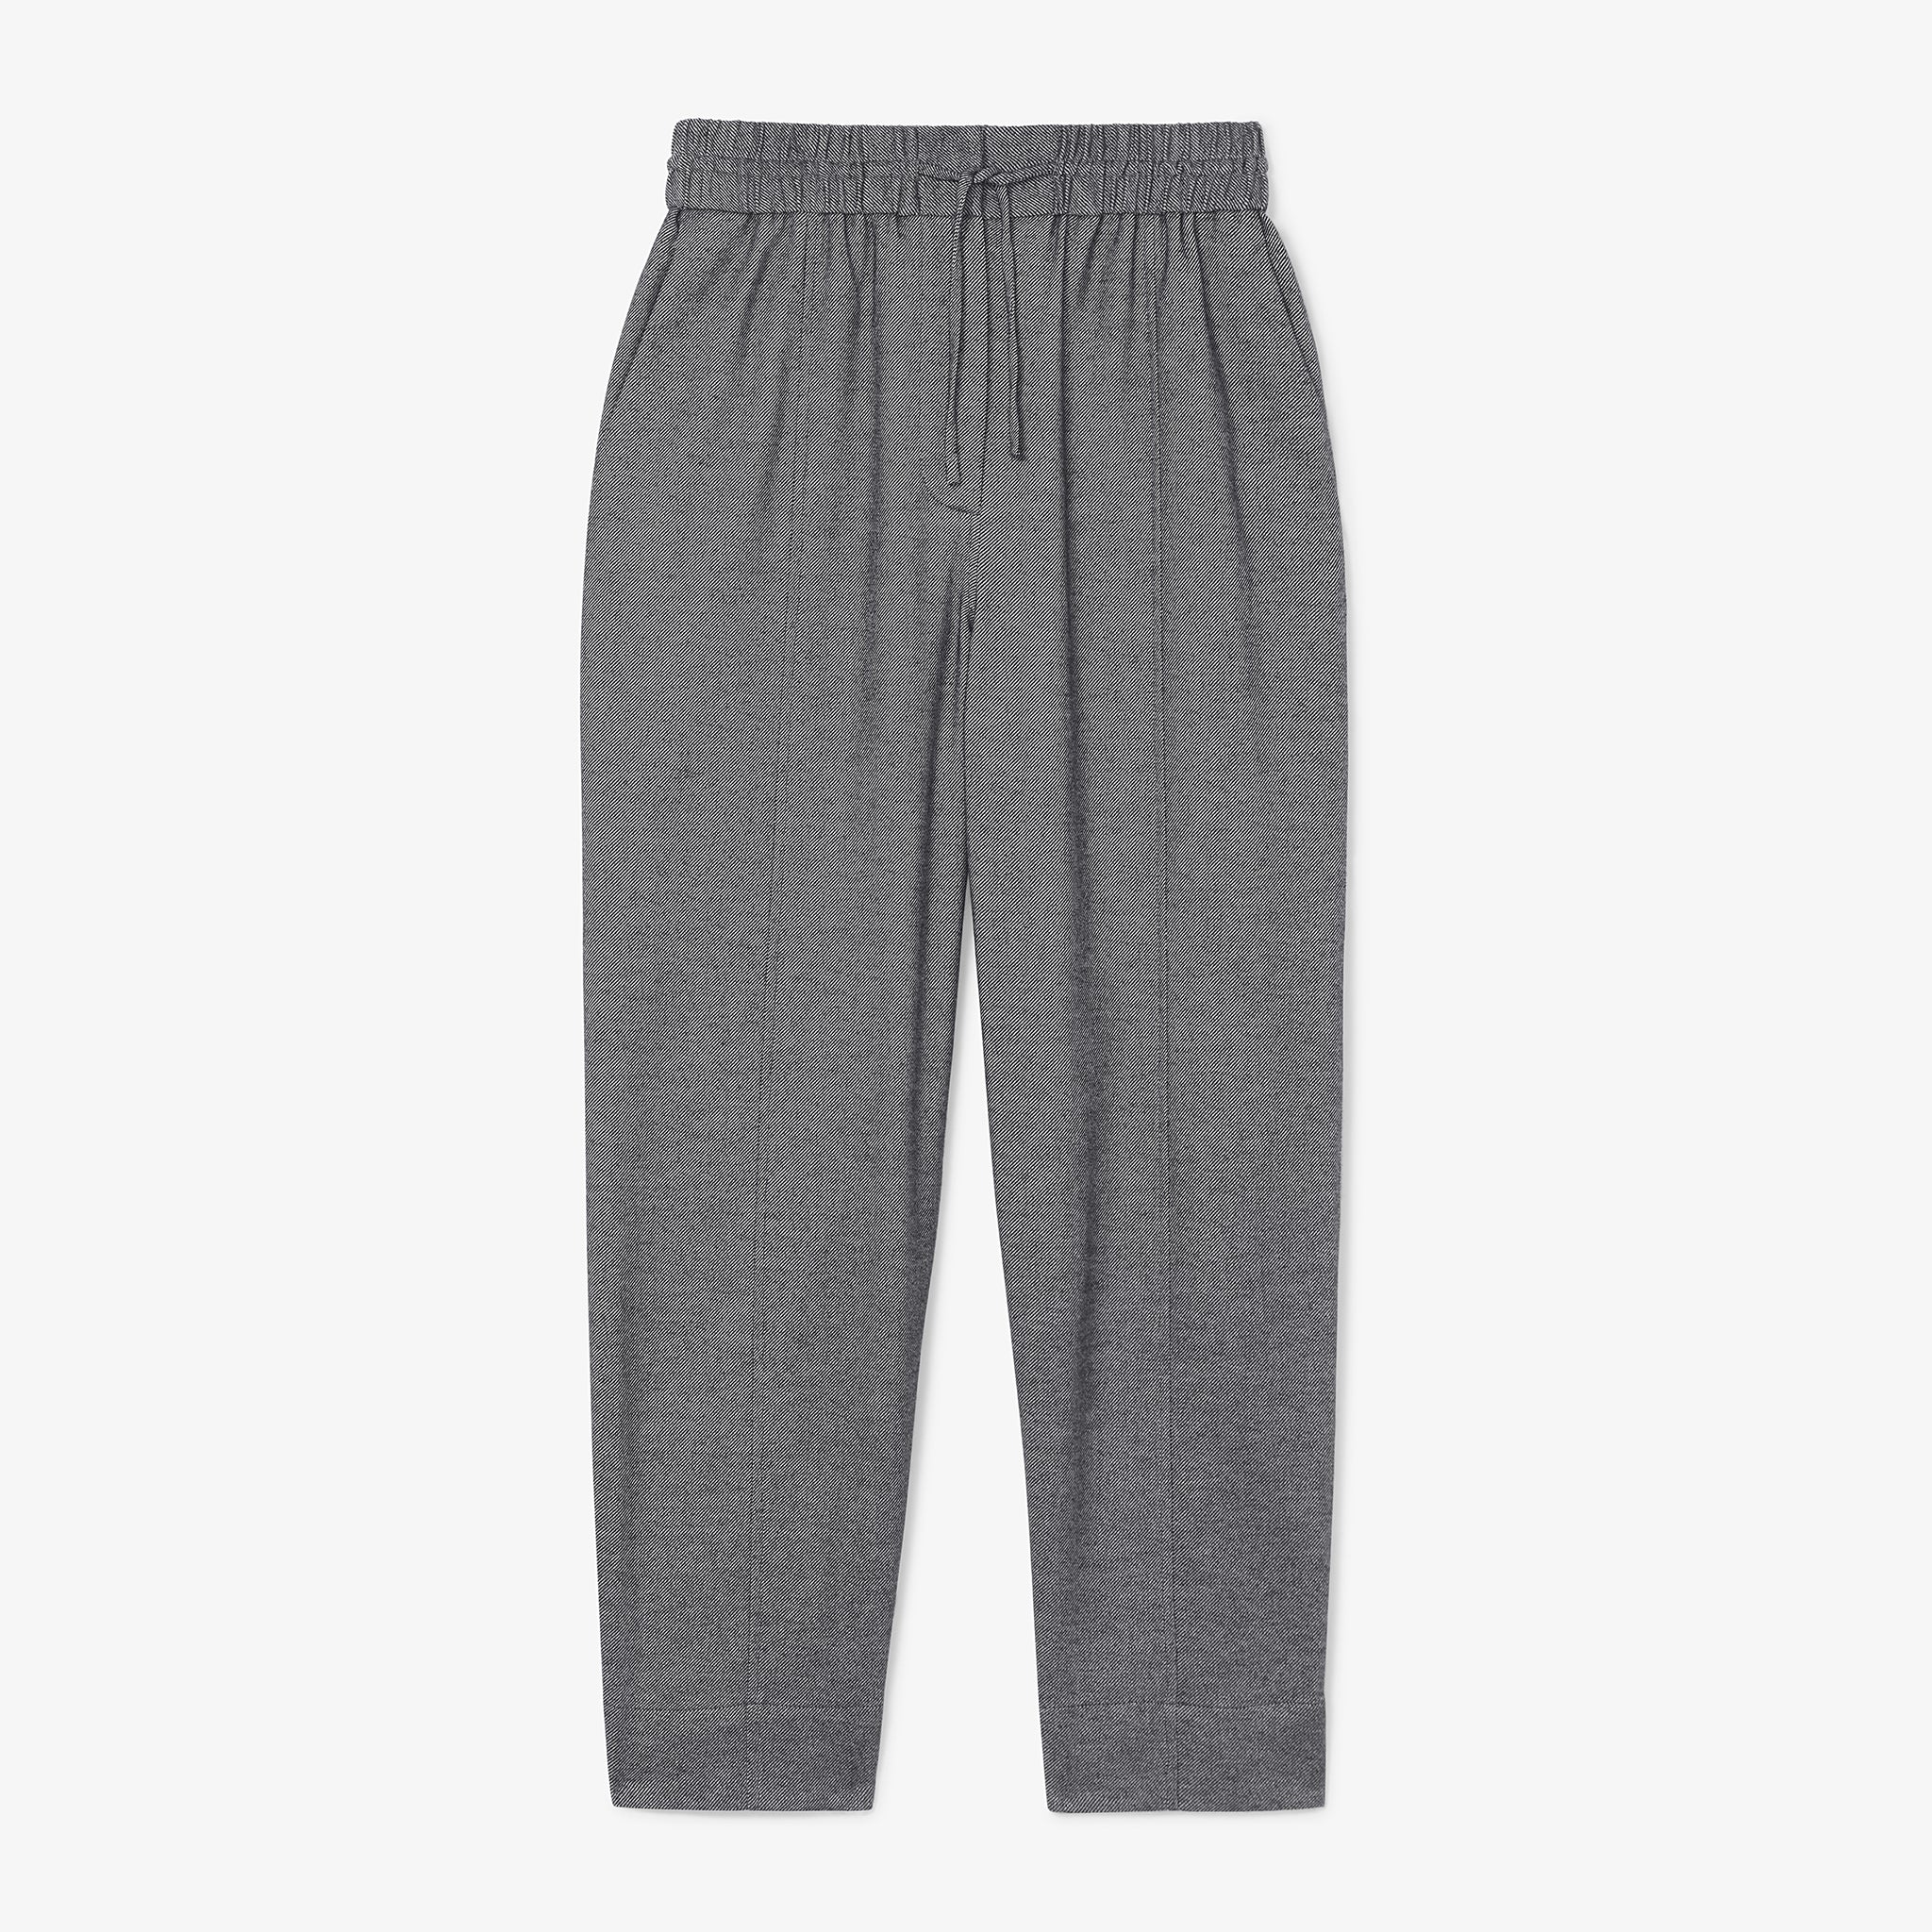 Packshot image of the shane pant in flannel twill